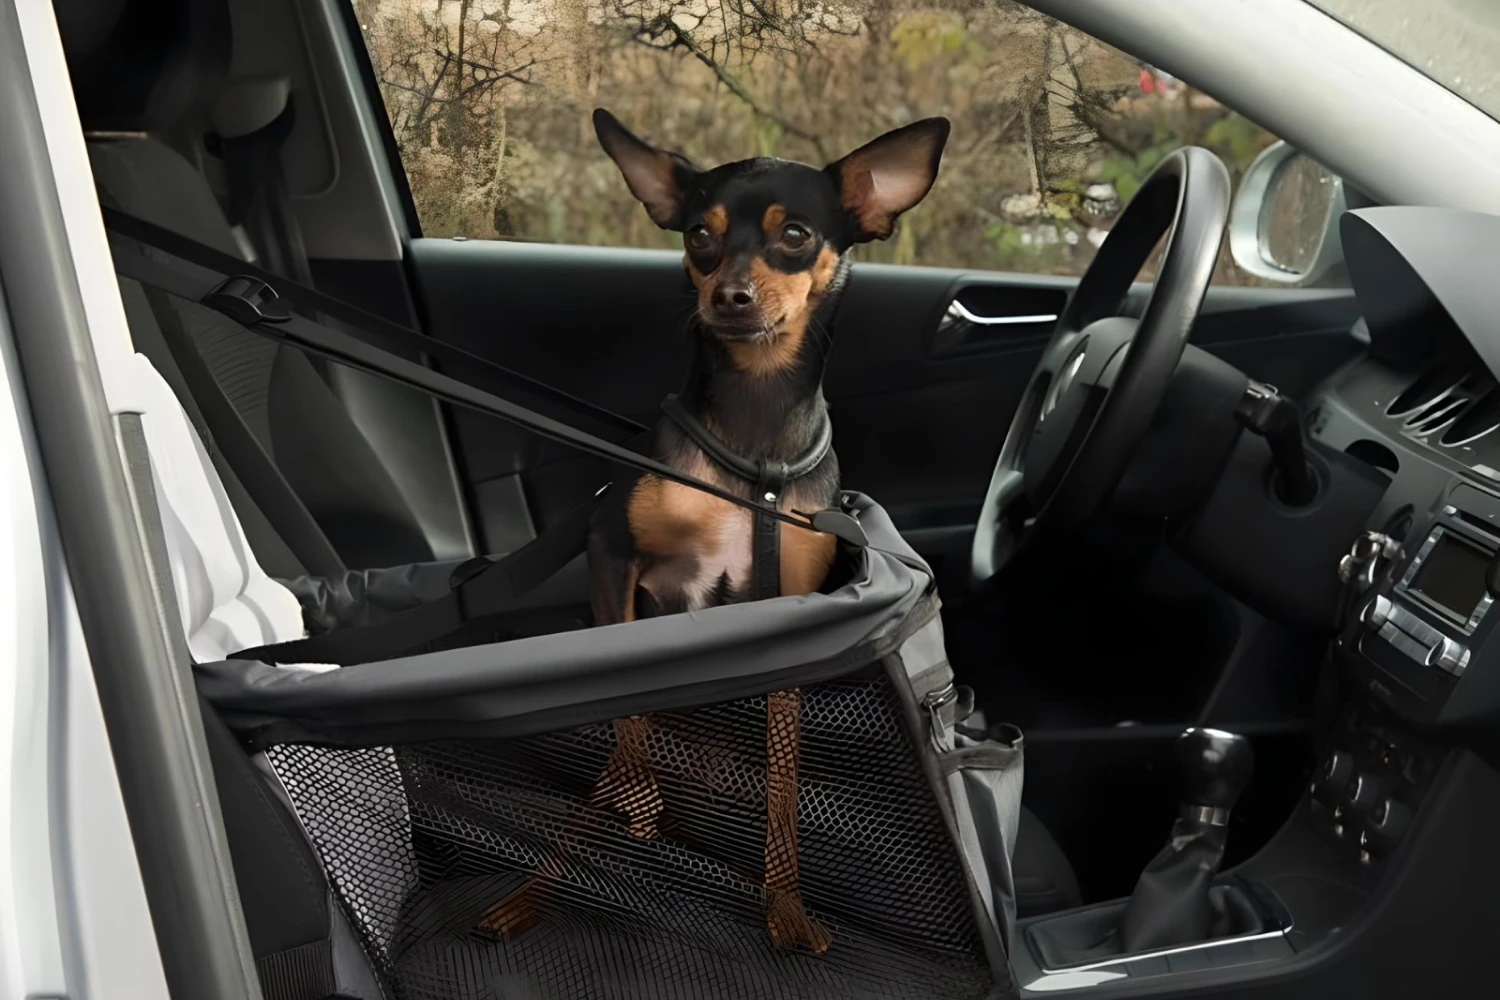 Jeep Grand Cherokee Dog Carrier Car Seat for Toy Manchester Terrier